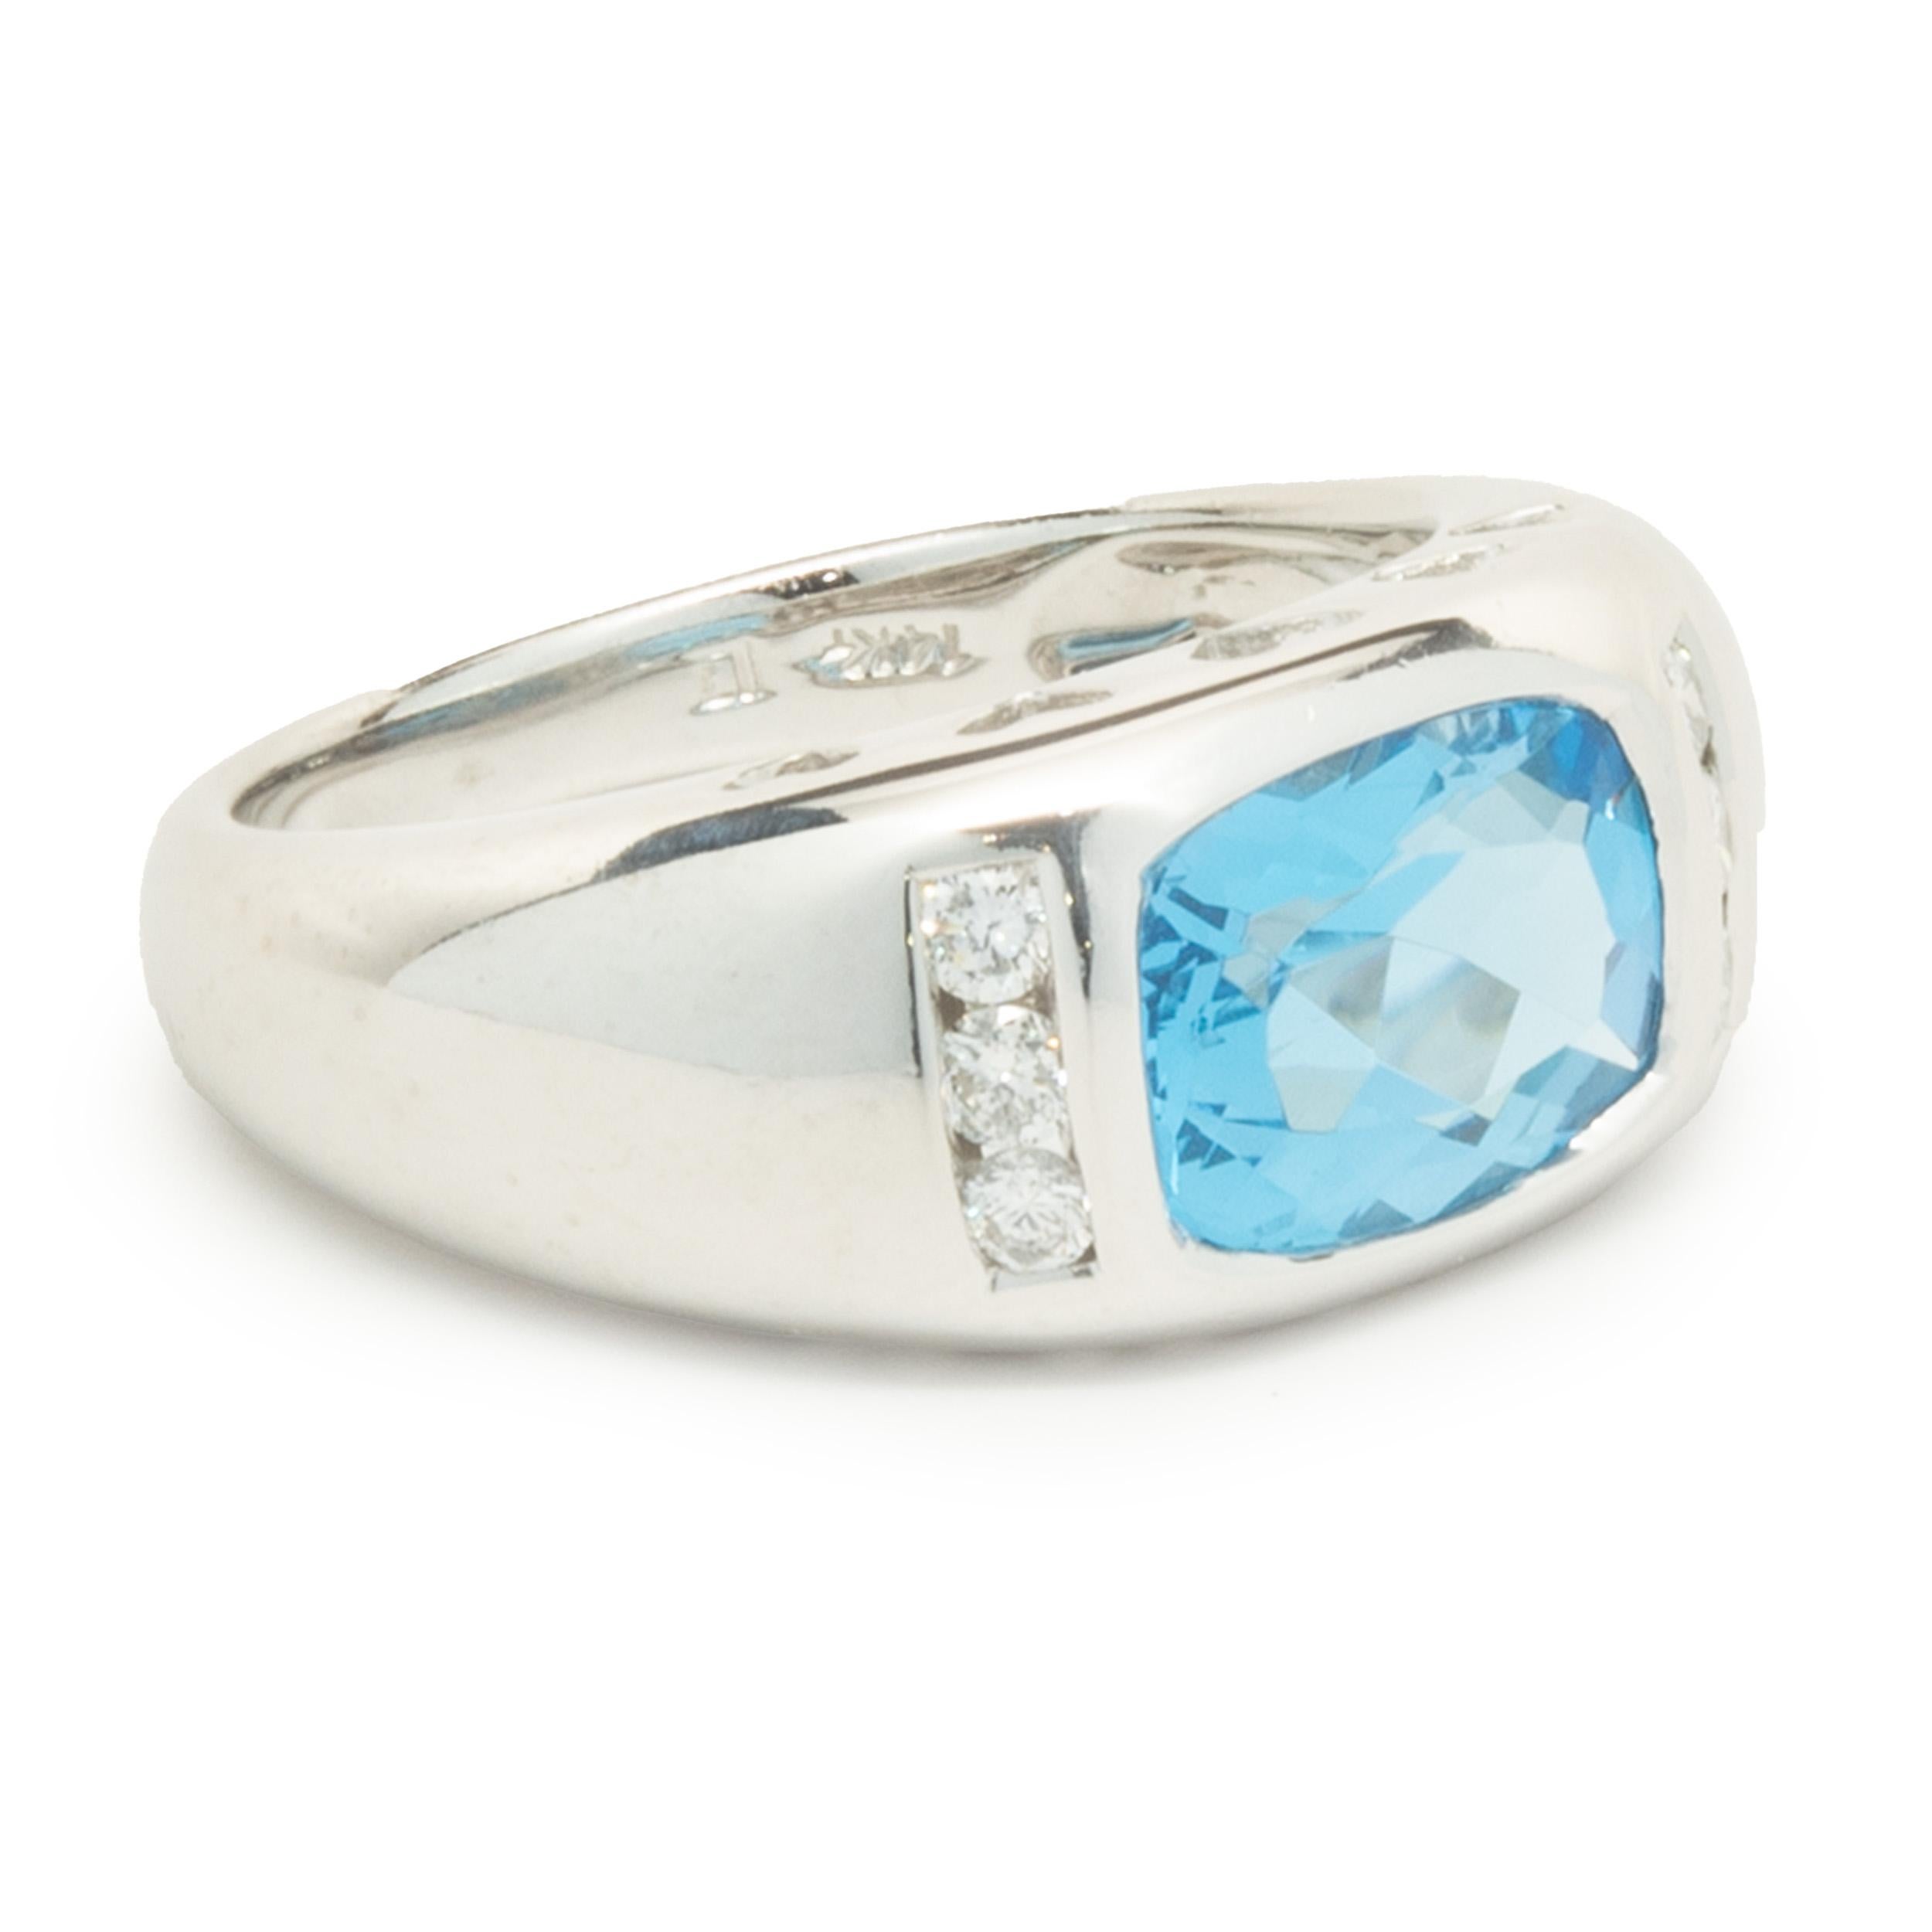 Designer: custom
Material: 14K white gold
Diamond: 6 round brilliant cut = 0.18cttw
Color: G
Clarity: SI1
Ring Size: 6.25 (complimentary sizing available)
Weight: 5.75 grams